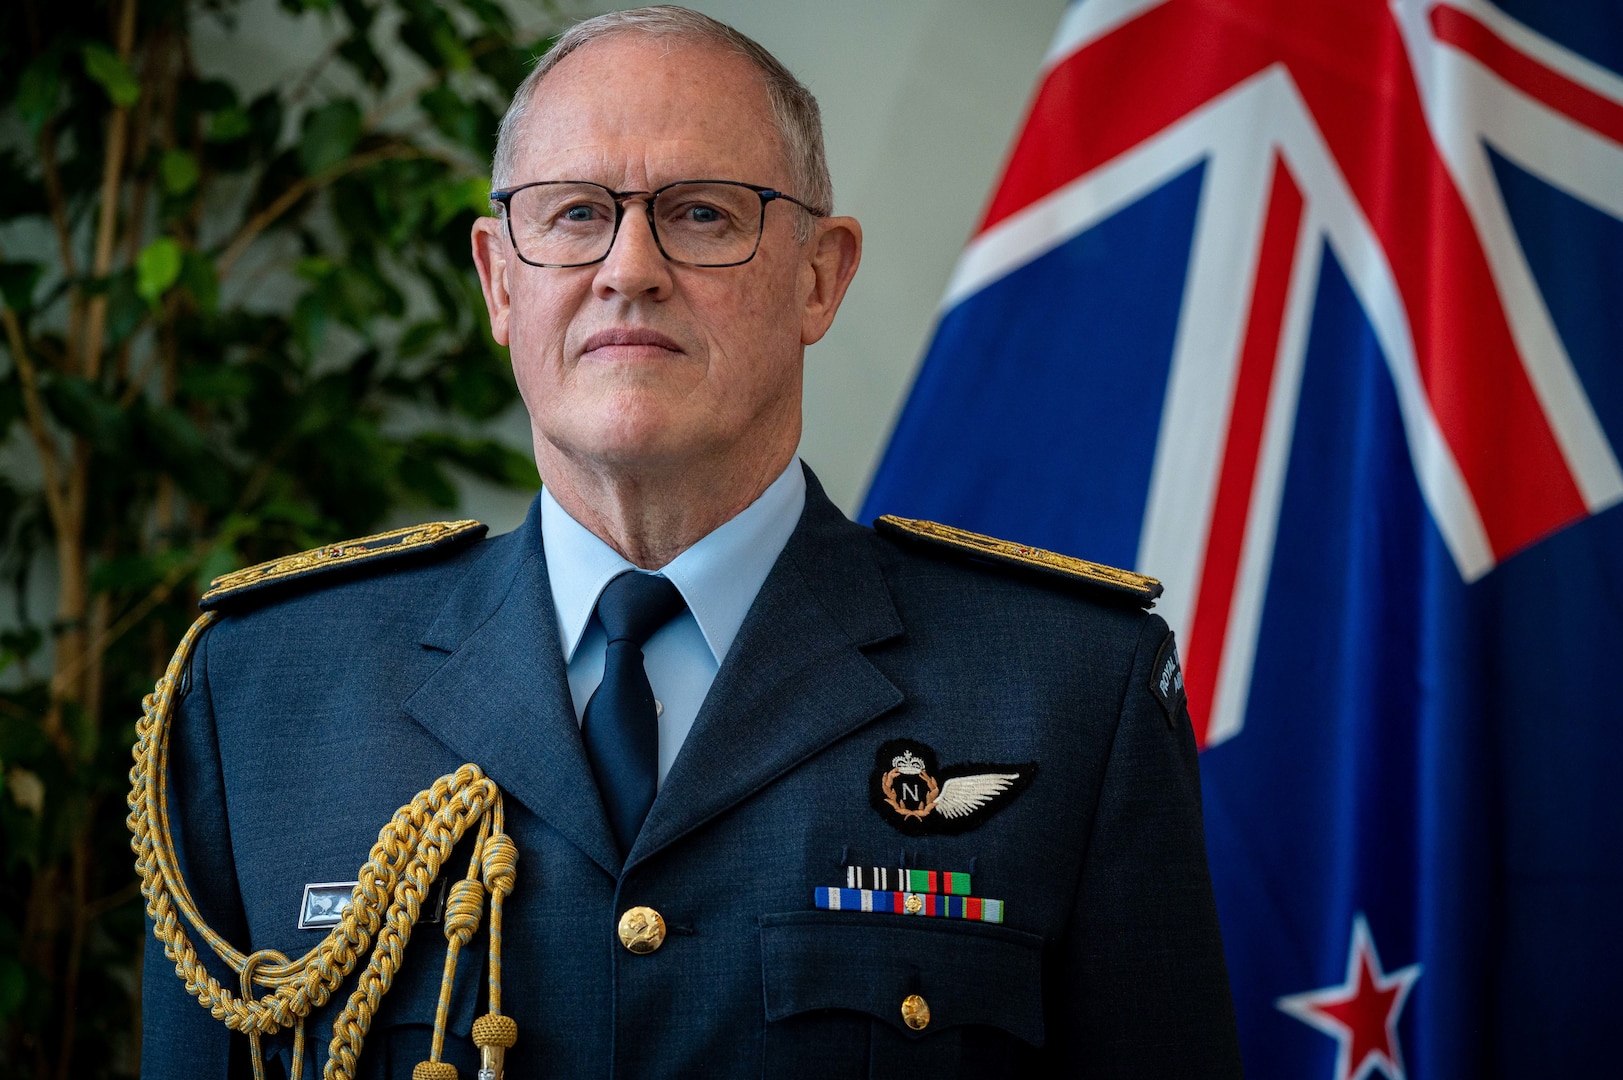 Air Marshal Kevin R. Short, New Zealand Defense Force Chief of Defence Force, receives the Legion of Merit pinned by Adm. John C. Aquilino, Commander of U.S. Indo-Pacific Command, in Wellington, New Zealand, on April 6, 2024. The Legion of Merit is the highest accolade that the U.S. can bestow upon a foreign leader; it is reserved for individuals who have shown exceptionally meritorious conduct in the performance of outstanding services. USINDOPACOM is committed to enhancing stability in the Indo-Pacific region by promoting security cooperation, encouraging peaceful development, responding to contingencies, deterring aggression and, when necessary, fighting to win. (U.S. Navy photo by Chief Mass Communication Specialist Shannon M. Smith)